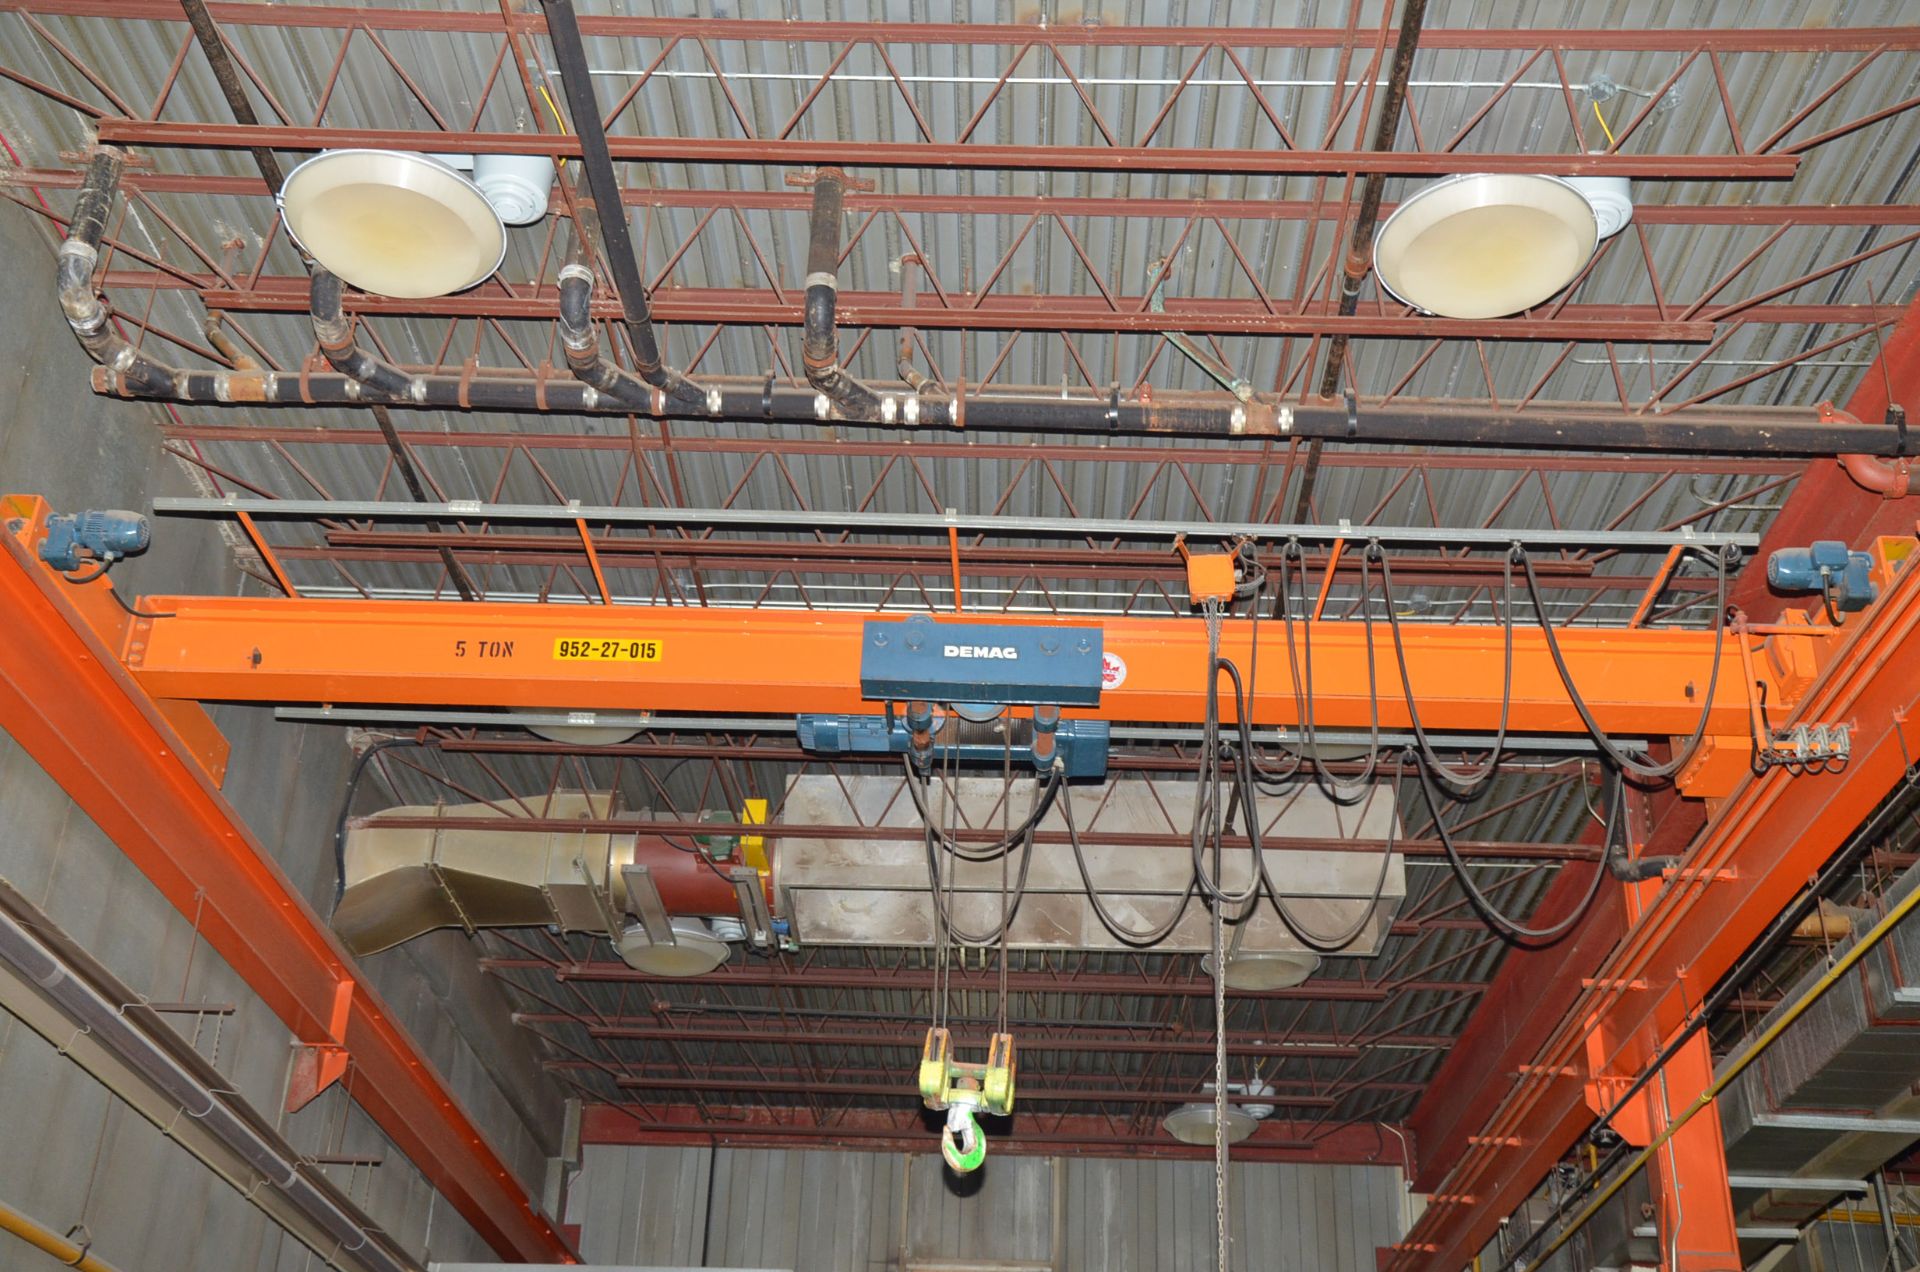 DEMAG 5TON CAPACITY TOP-RUNNING SINGLE-GIRDER OVERHEAD BRIDGE CRANE SYSTEM WITH 24' SPAN, 20' HEIGHT - Image 2 of 5